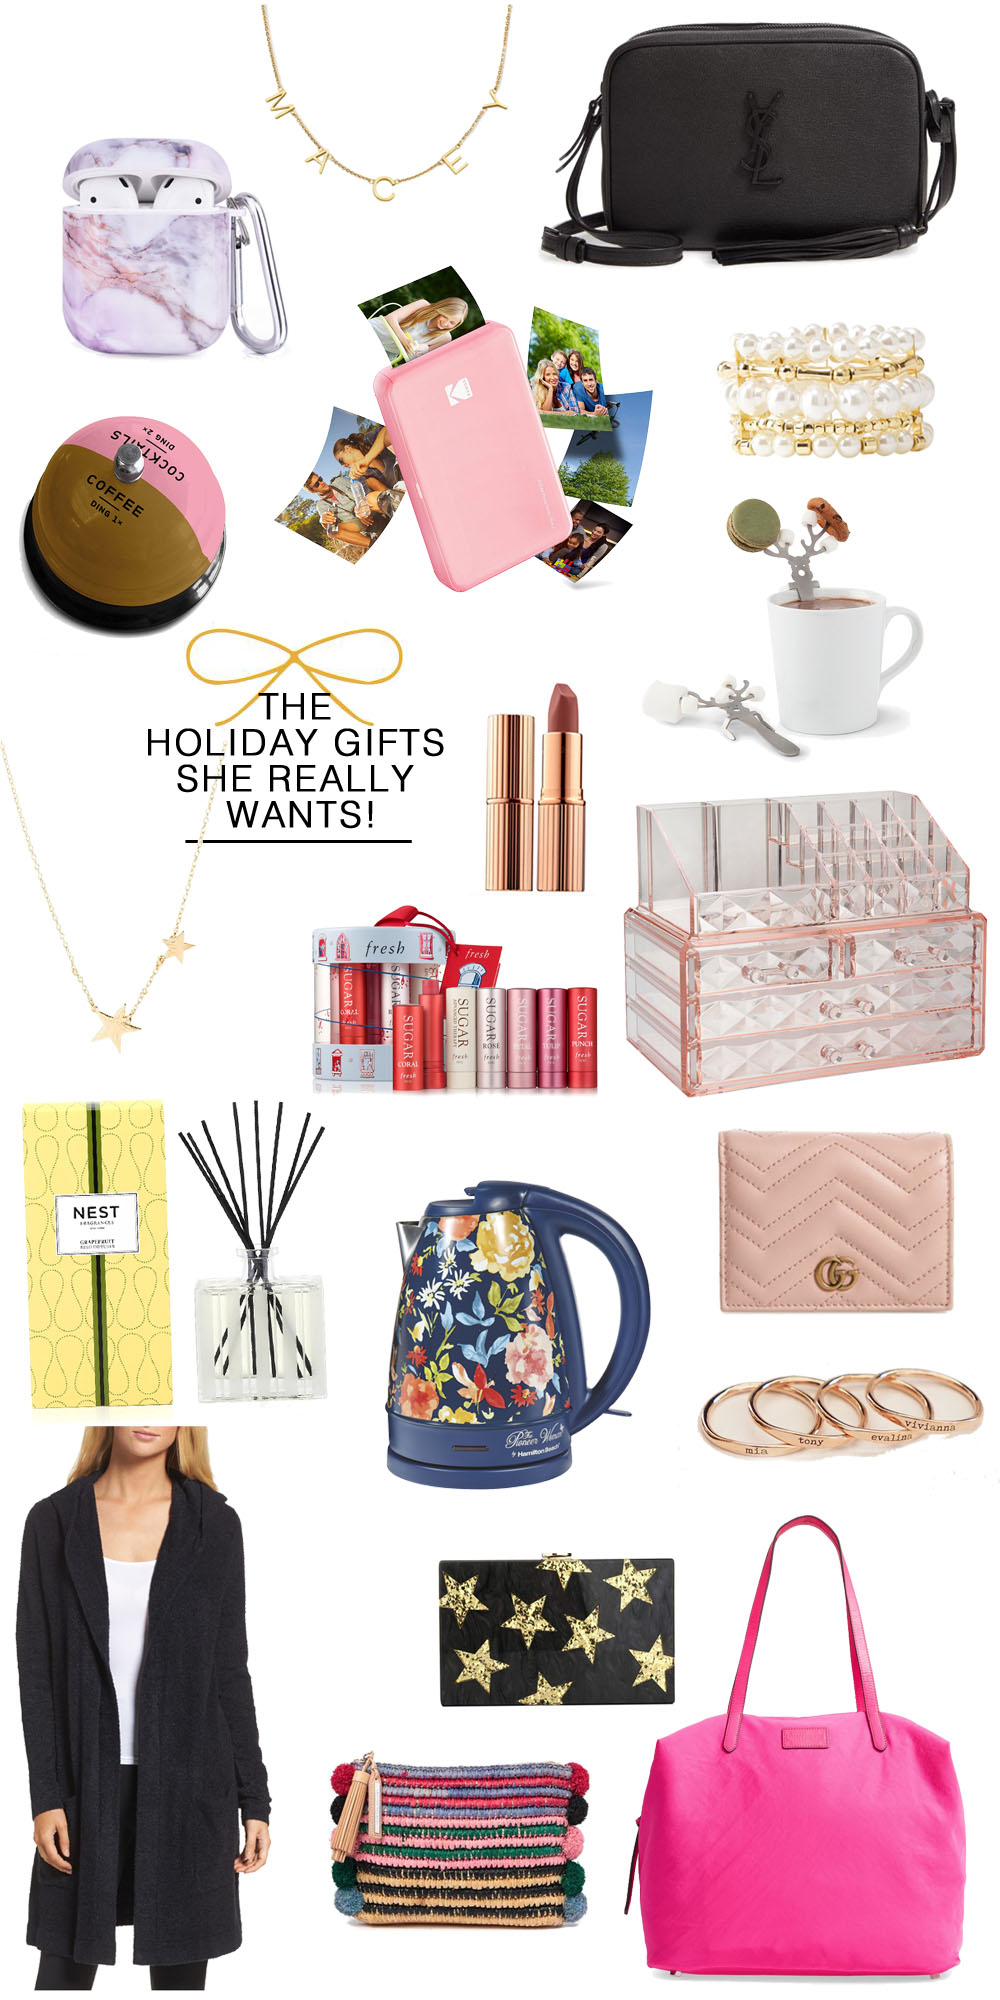 The 20+ Holiday Gifts for Her  this Season by popular Florida life and style blog, The Modern Savvy: collage image of Marble iPods case, name necklace, YSL purse, Coffee time bell, instant photo printer, Lilly Pulitzer pearl bracelet, reindeer dessert stirrers, Gorjana star necklace, Fresh lip set, Charlotte Tillbury lipstick, Pioneer Woman kettle, Gucci wallet and card case, engraved name rings, Barefoot Dreams cardigan, Loeffler Randall purse, Star clutch, Rebecca Minkoff nylon tote.